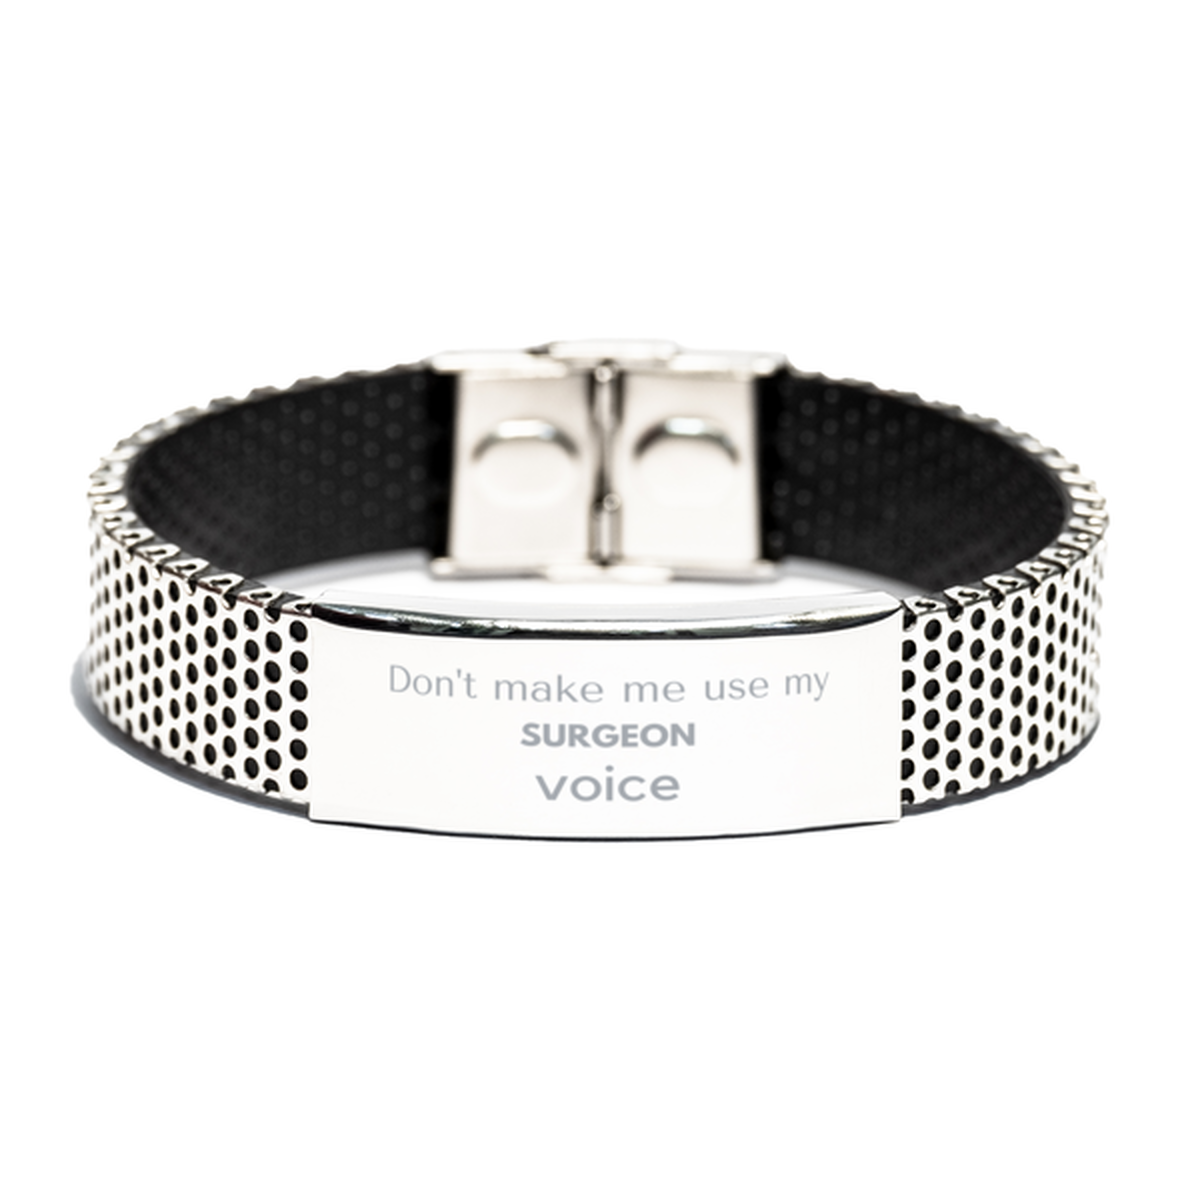 Don't make me use my Surgeon voice, Sarcasm Surgeon Gifts, Christmas Surgeon Stainless Steel Bracelet Birthday Unique Gifts For Surgeon Coworkers, Men, Women, Colleague, Friends